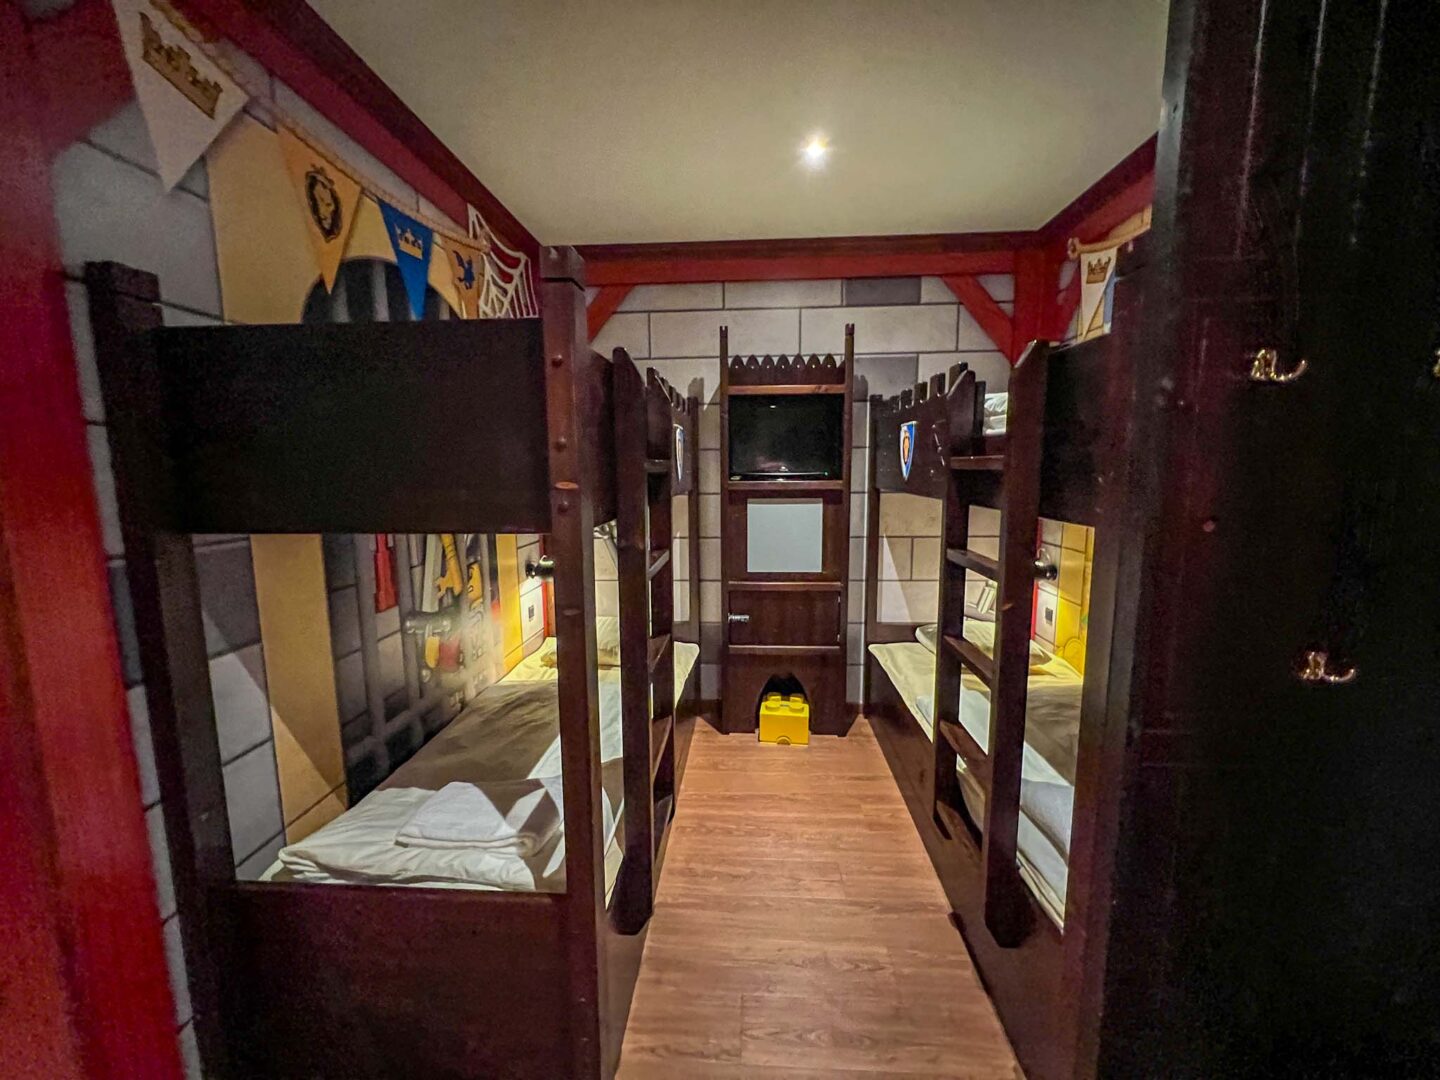 how to visit LEGOLAND Billund, LEGOLAND Castle Hotel knights room with 2 bunk beds